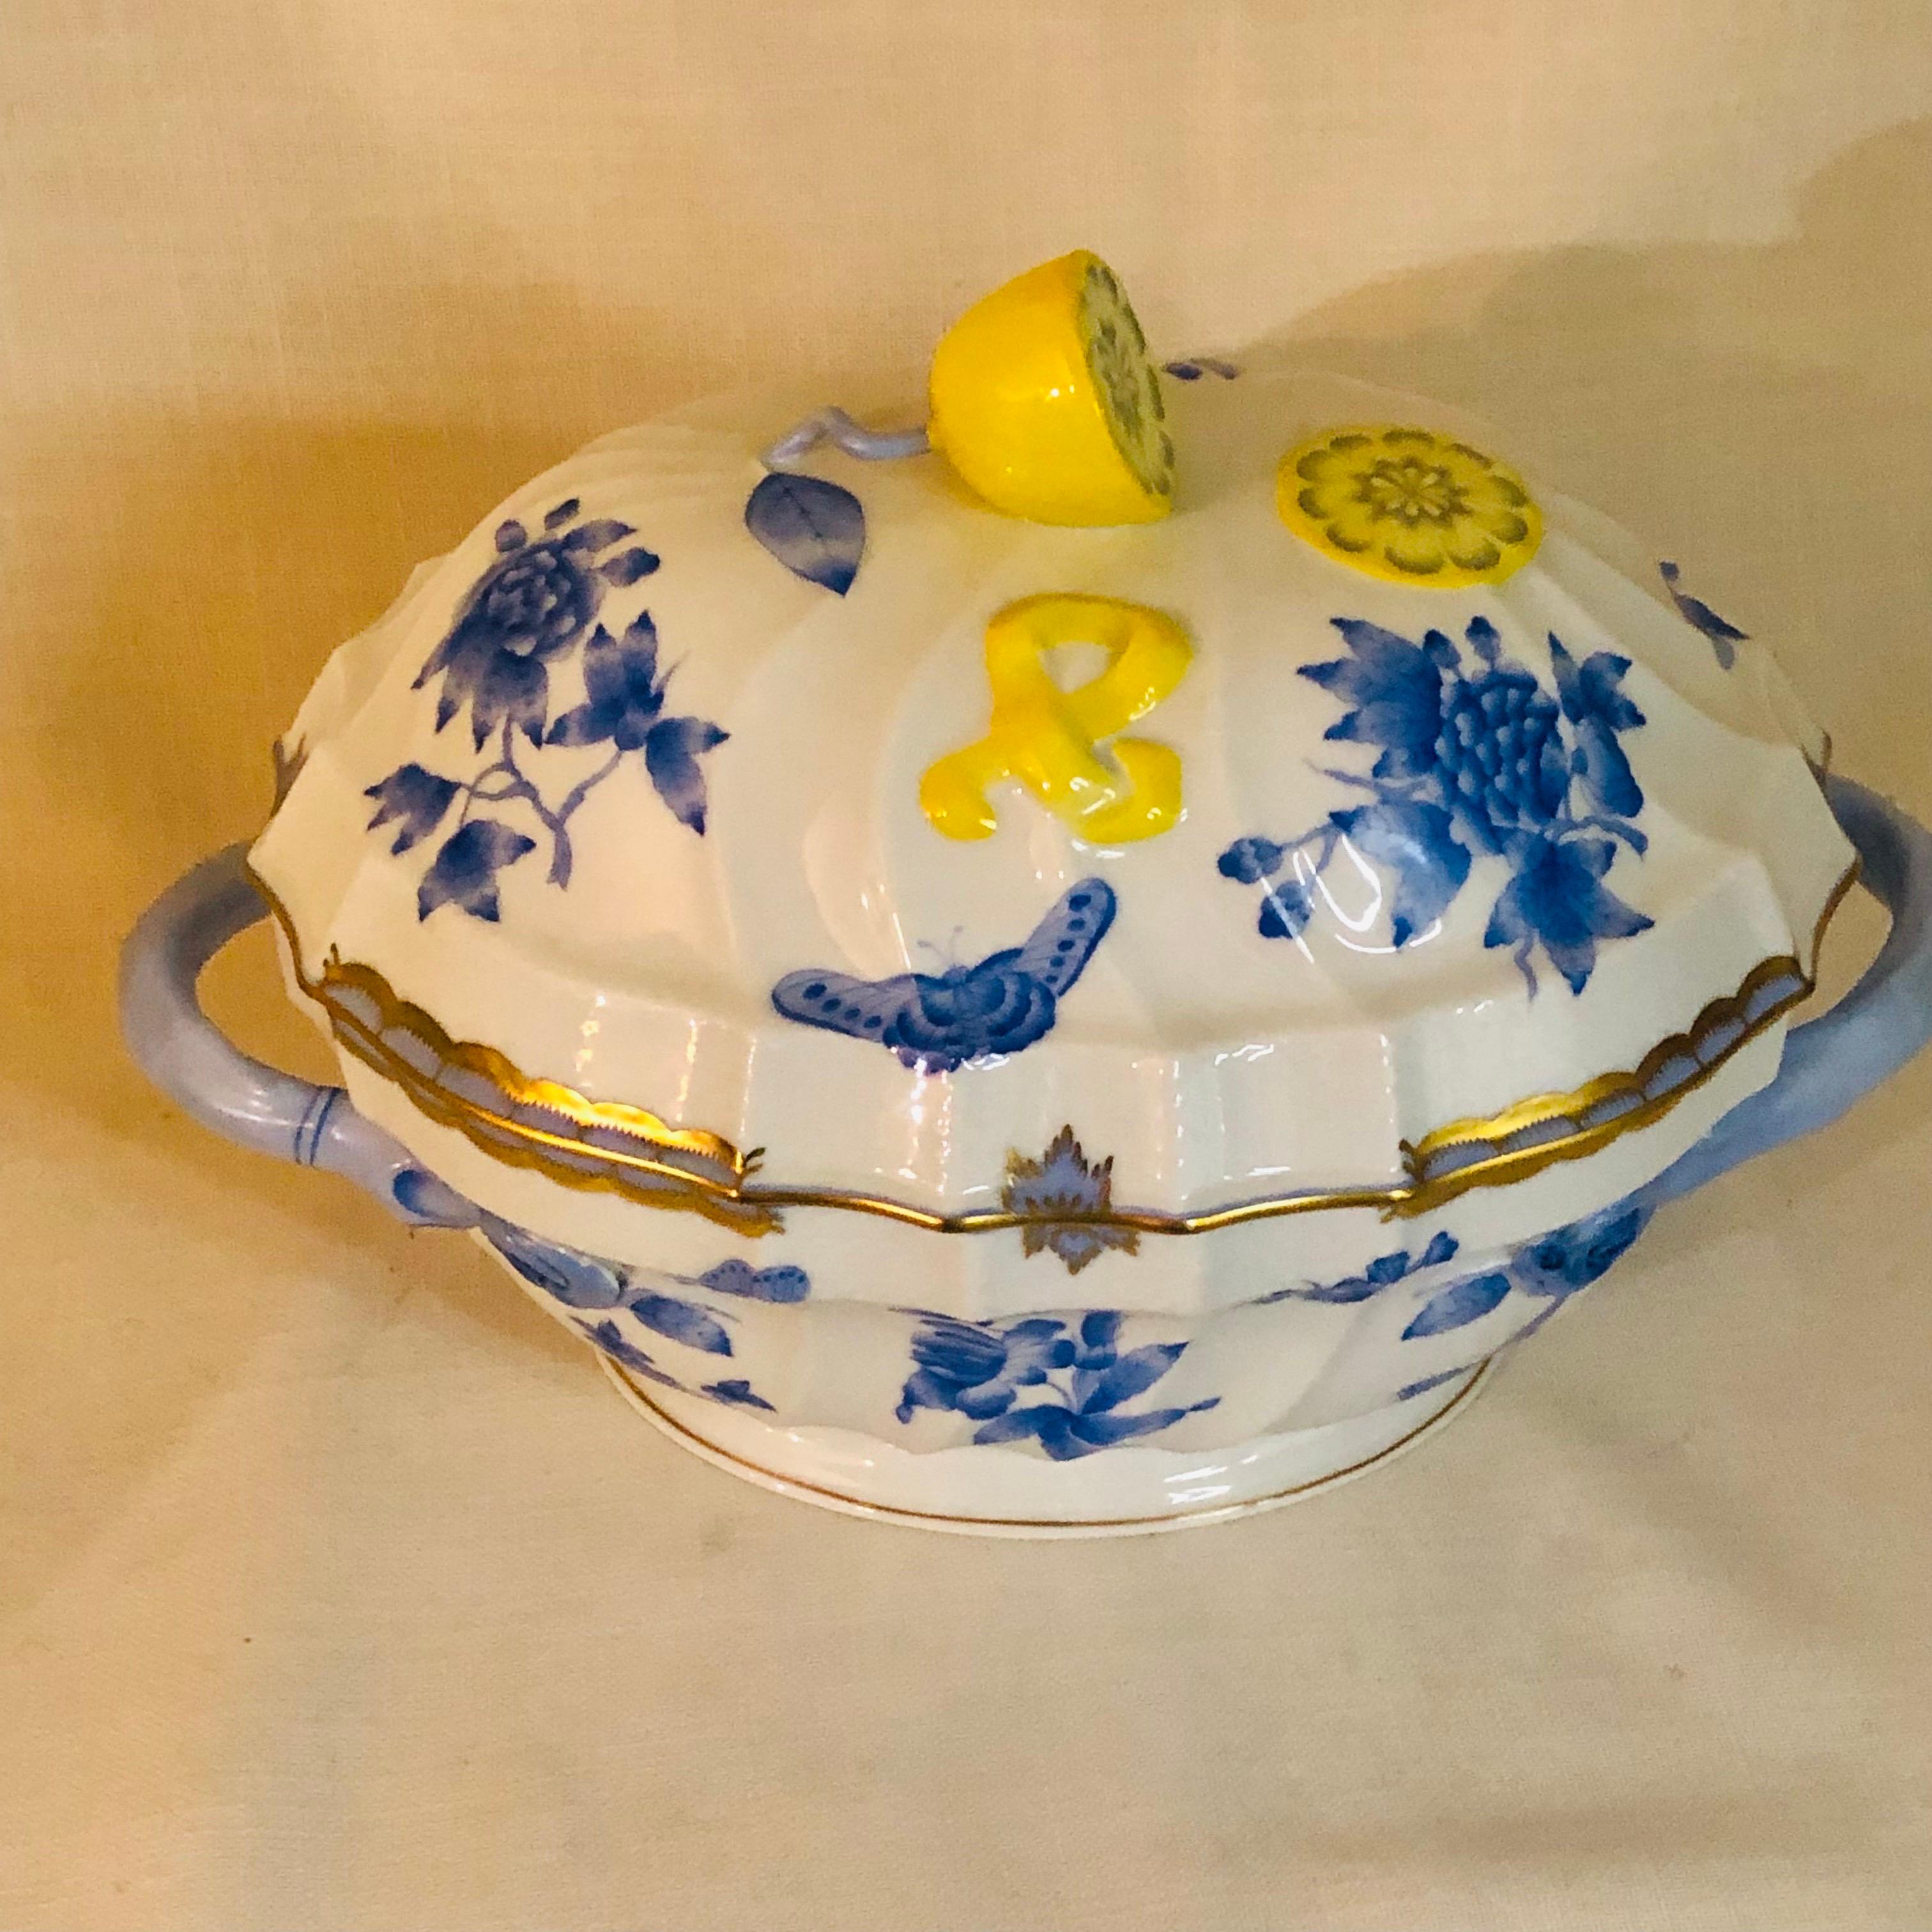 This is a beautiful Herend Fortuna soup tureen painted with blue butterflies and flowers on a white background with 24 karat gold accents. It has a wonderful shaped lemon on its cover. It would be a charming decorative piece on your dining room